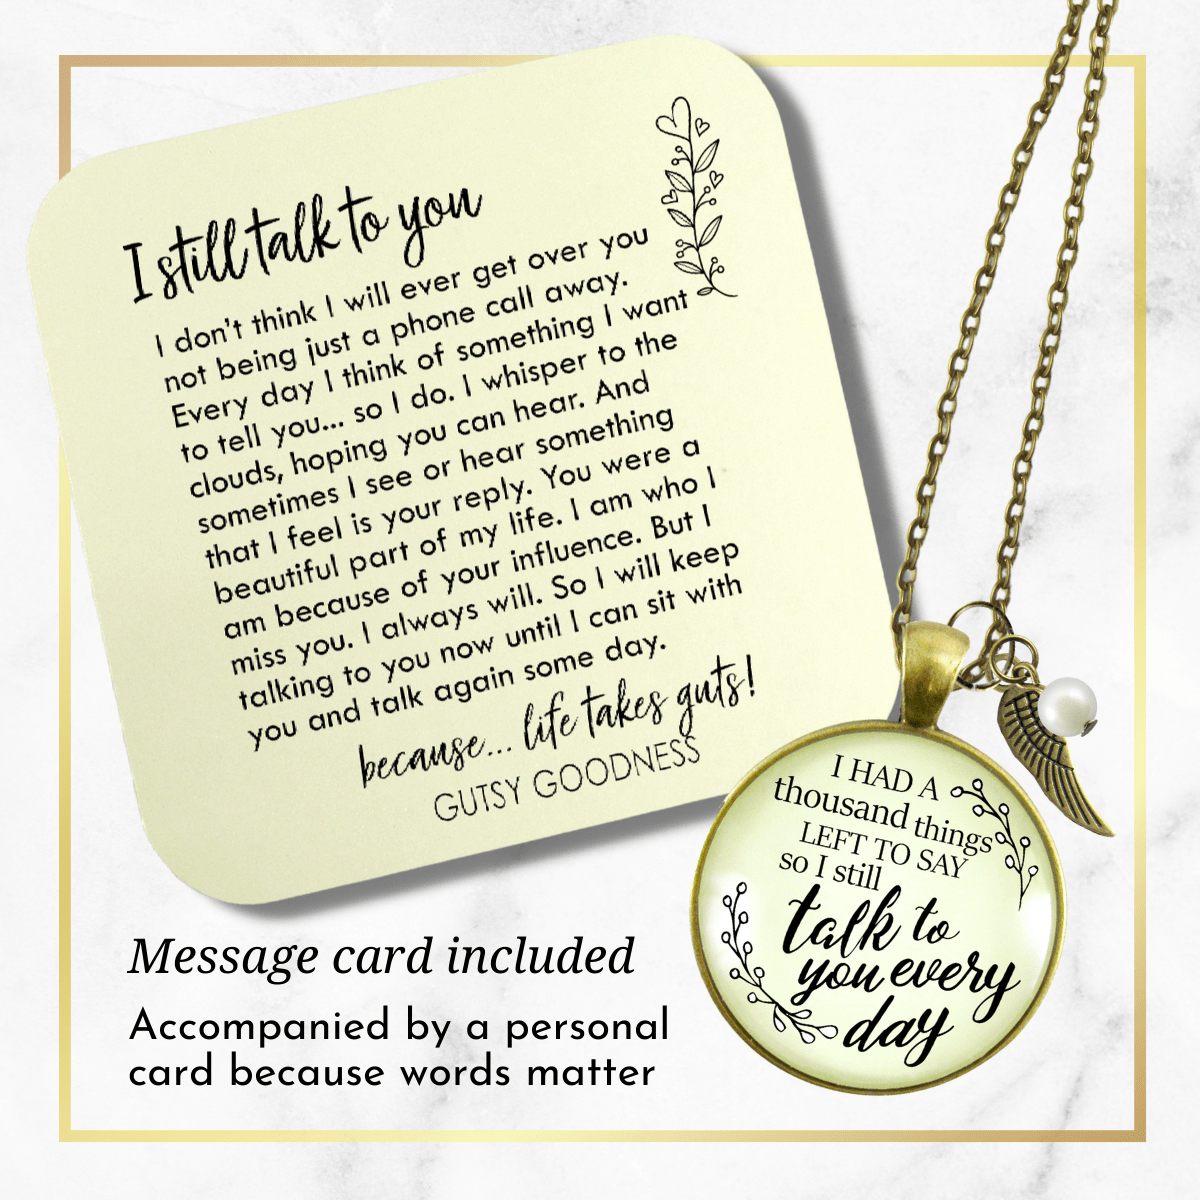 Gutsy Goodness Remembrance Necklace Thousand Things Miss You Memorial Jewelry - Gutsy Goodness;Remembrance Necklace Thousand Things Miss You Memorial Jewelry - Gutsy Goodness Handmade Jewelry Gifts